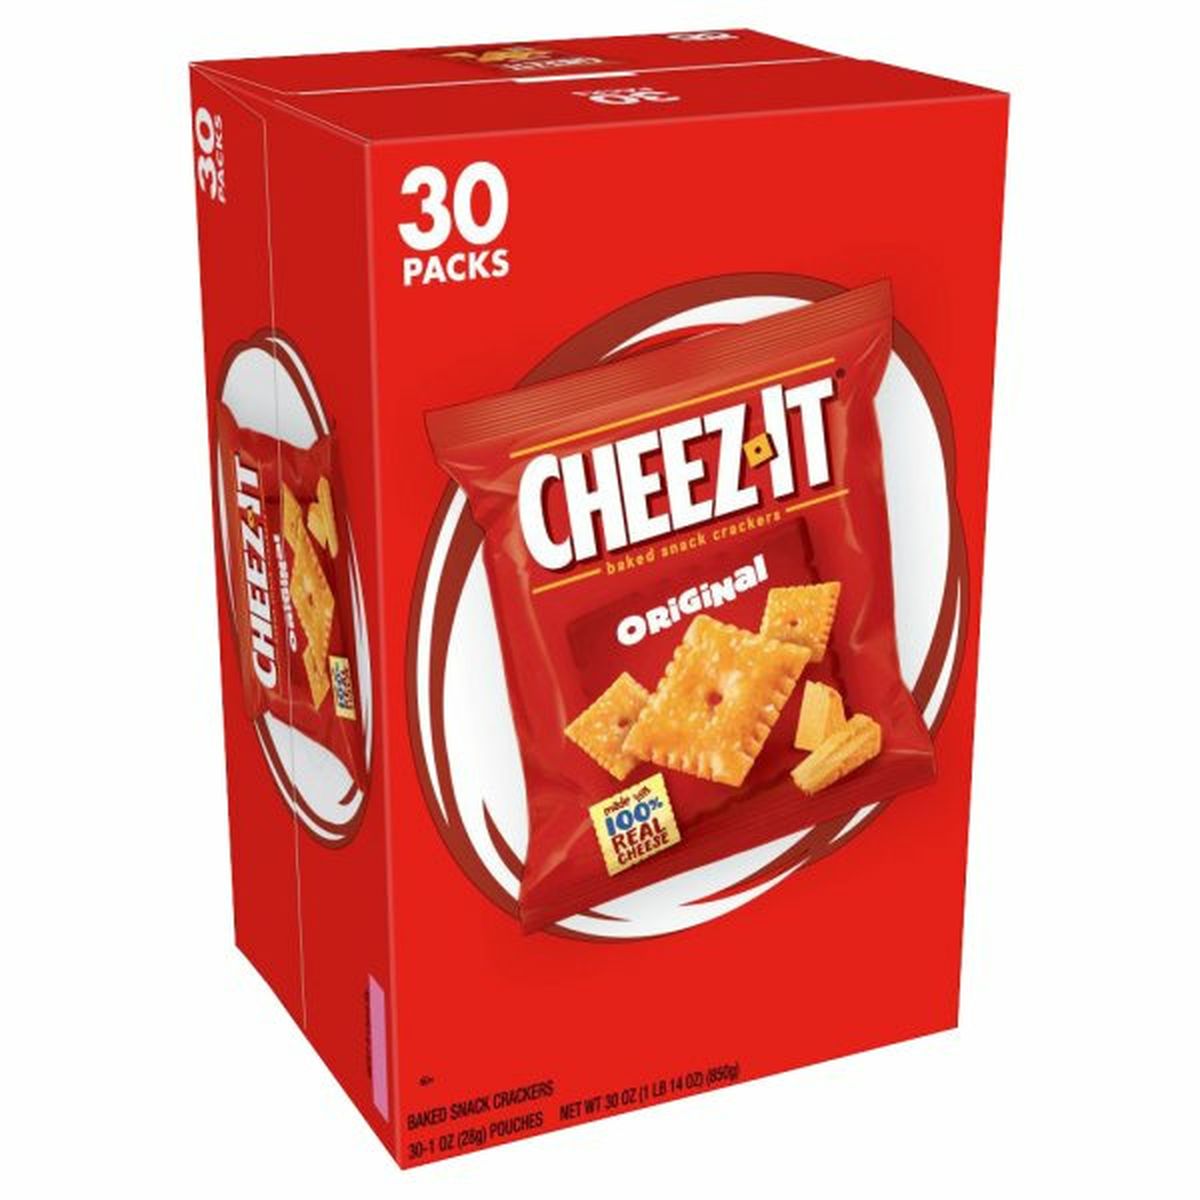 Calories in Cheez-It Crackers Baked Snack Cheese Crackers, Original, Single Serve